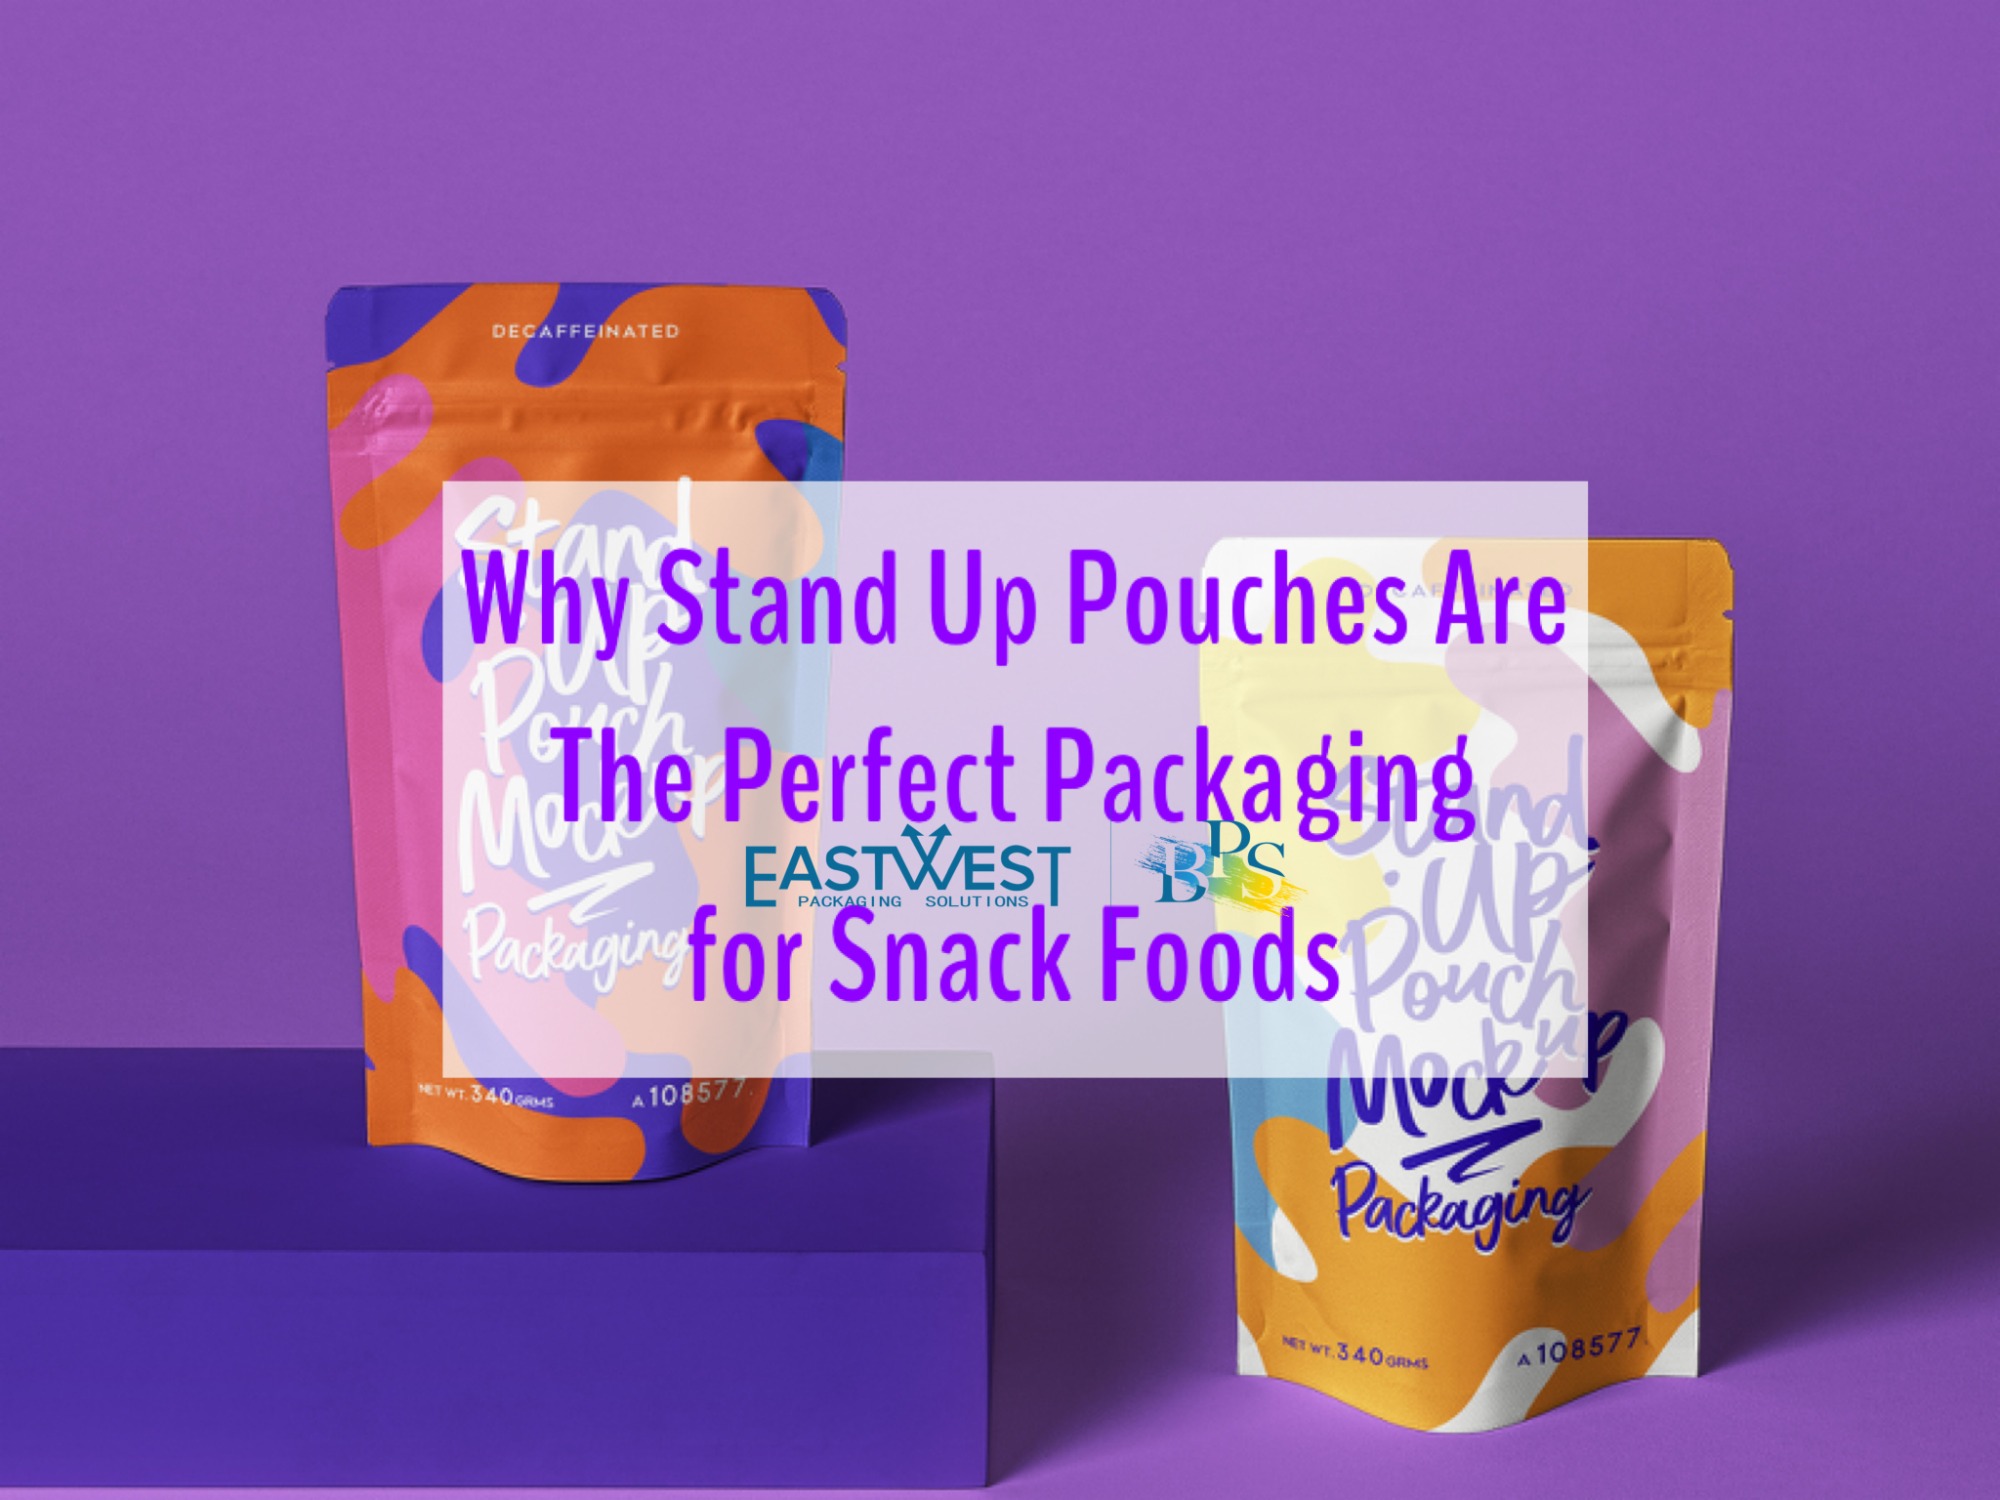 Why Stand Up Pouches are the Perfect Packaging for Snack Foods